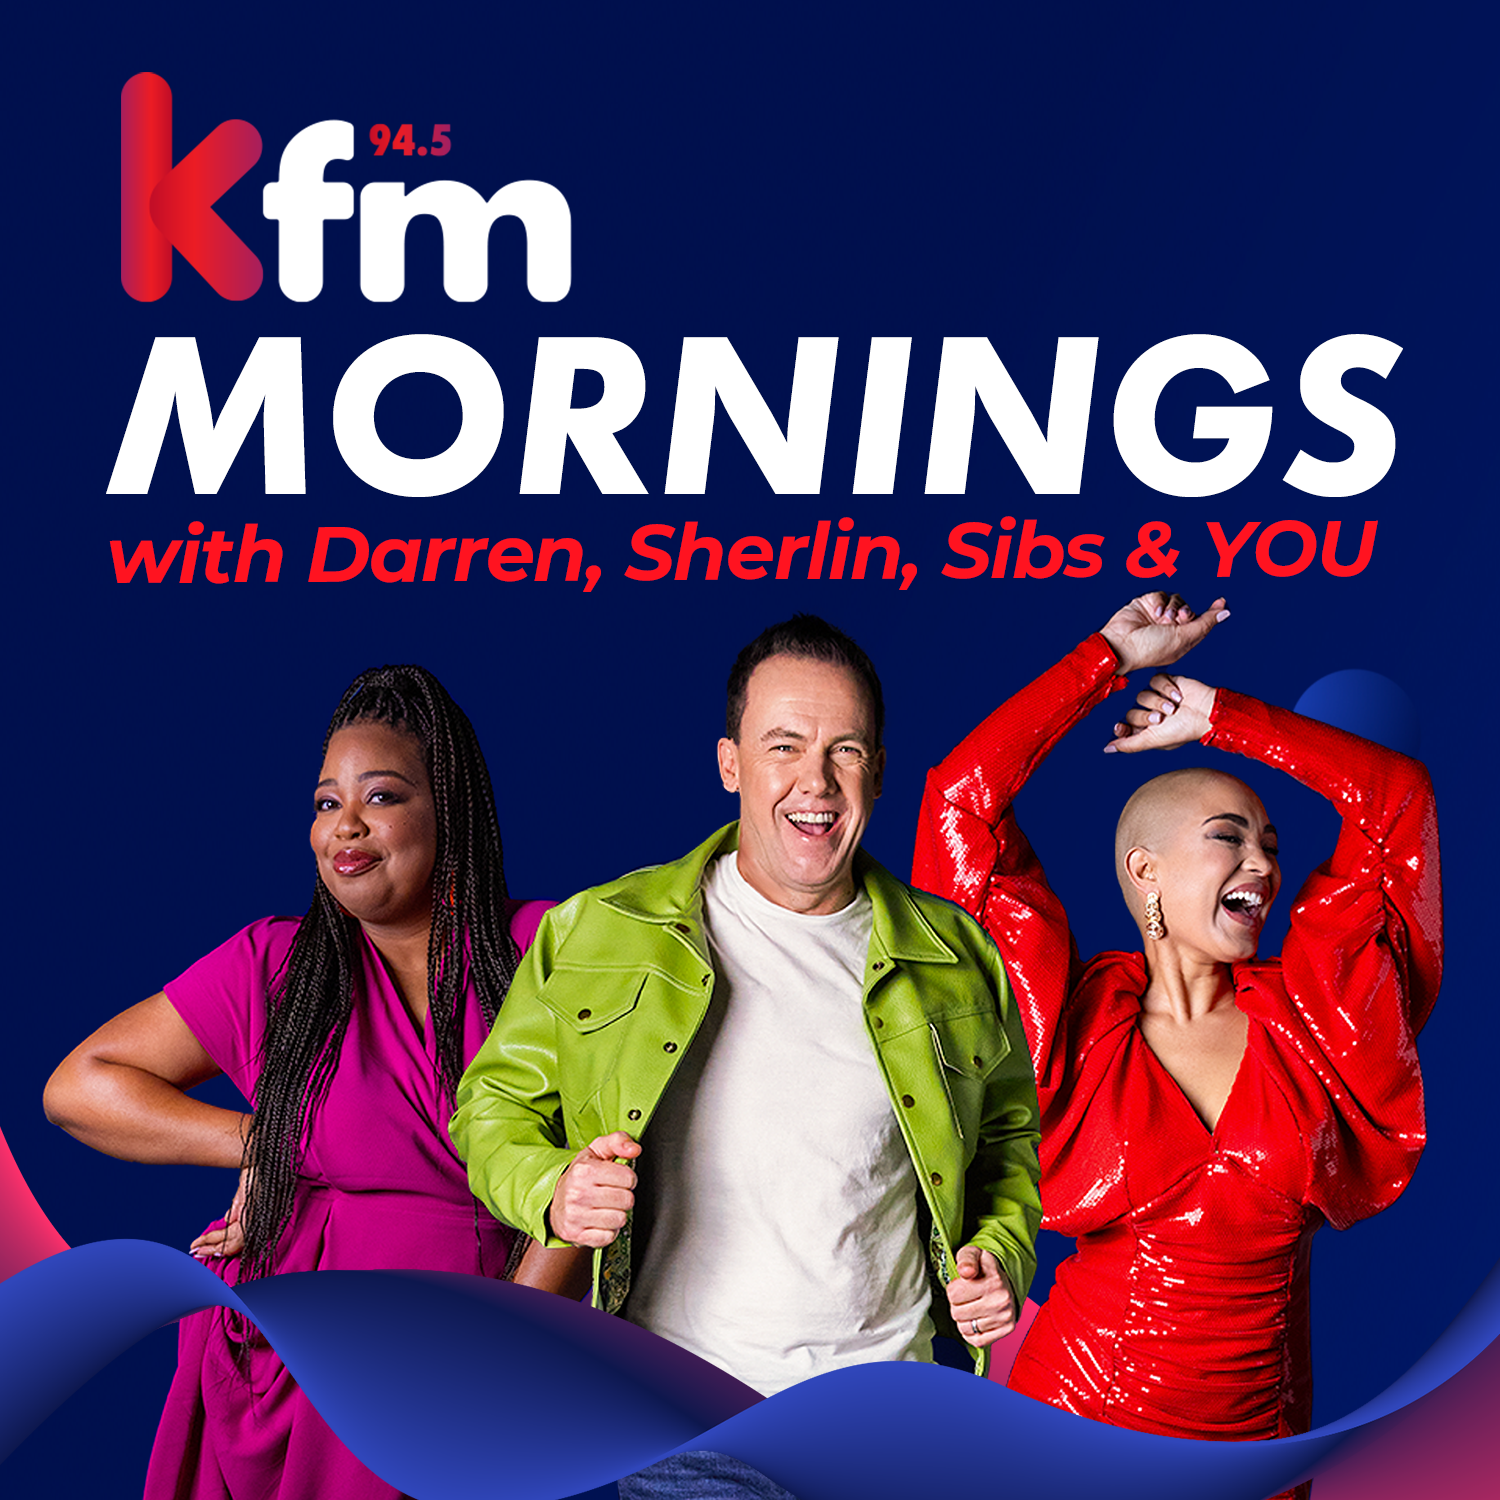 Kfm Mornings FULL SHOW: "I think I could be a doctor"